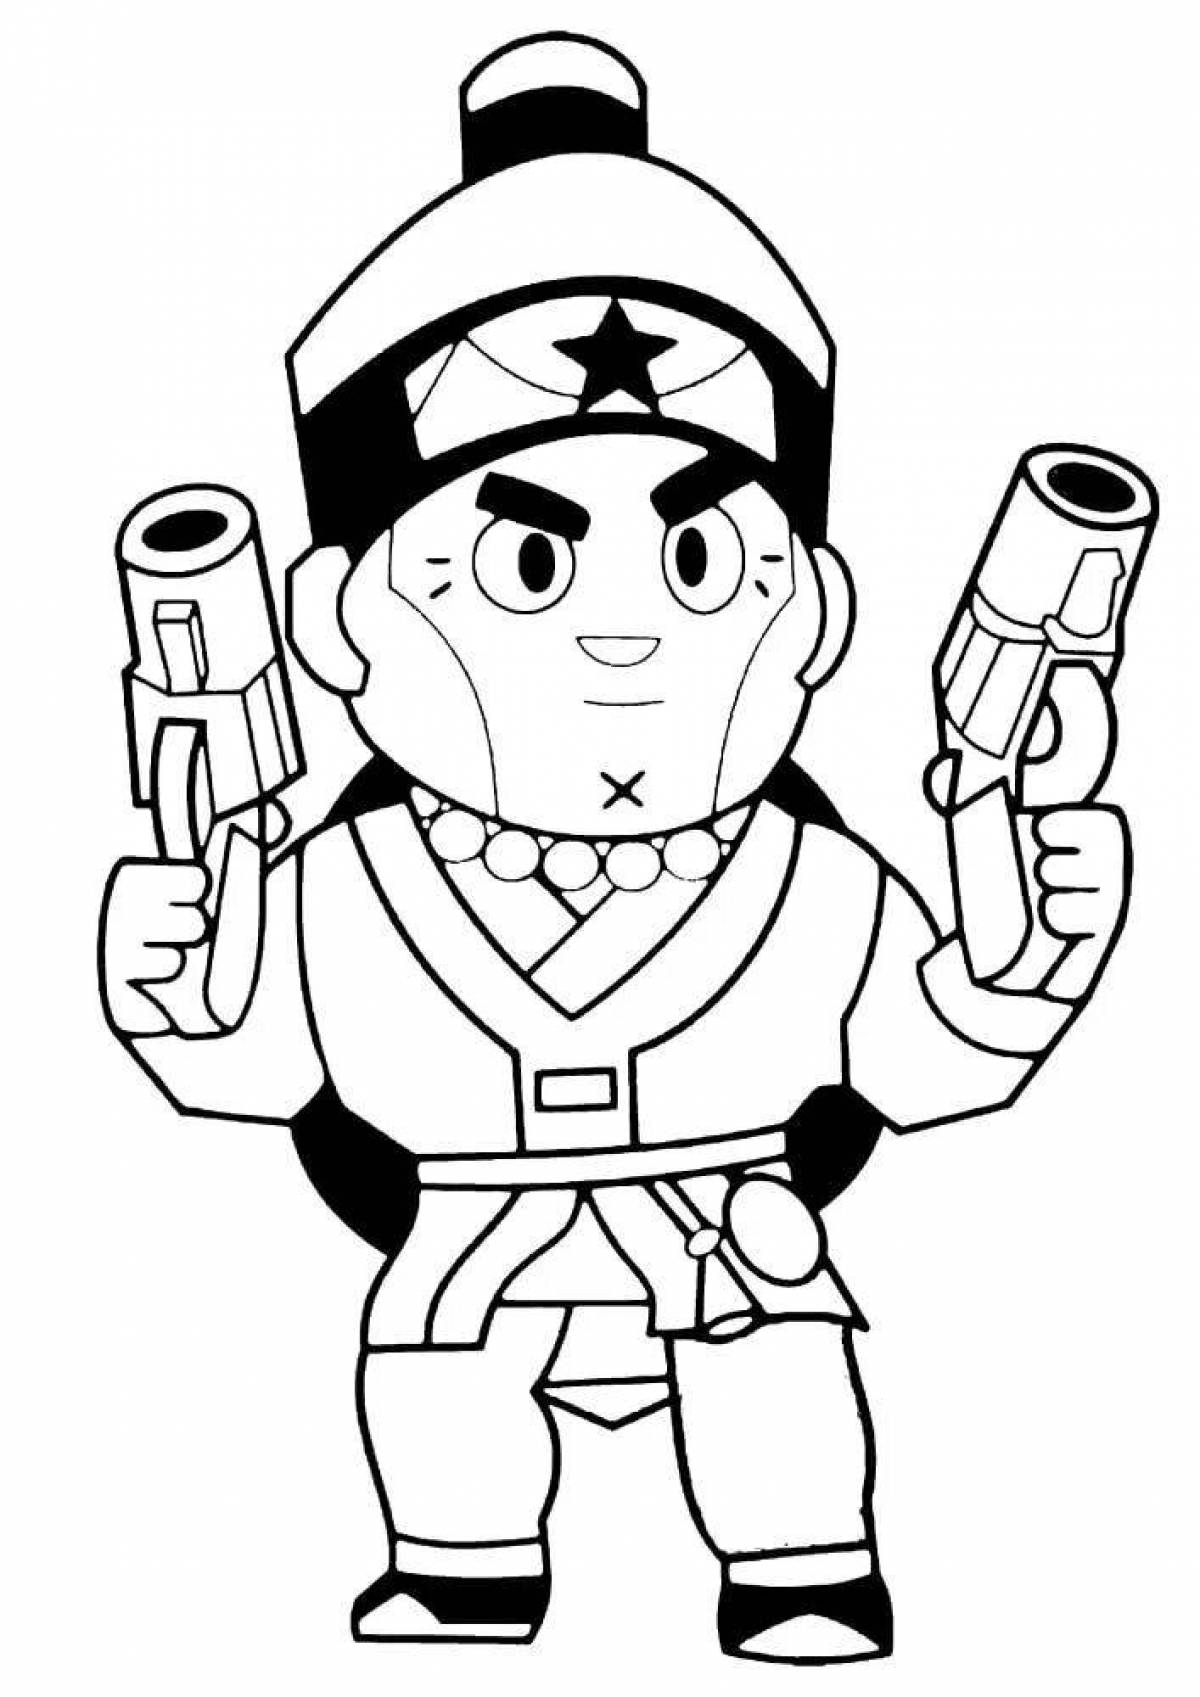 Charming bravo stars colt coloring page